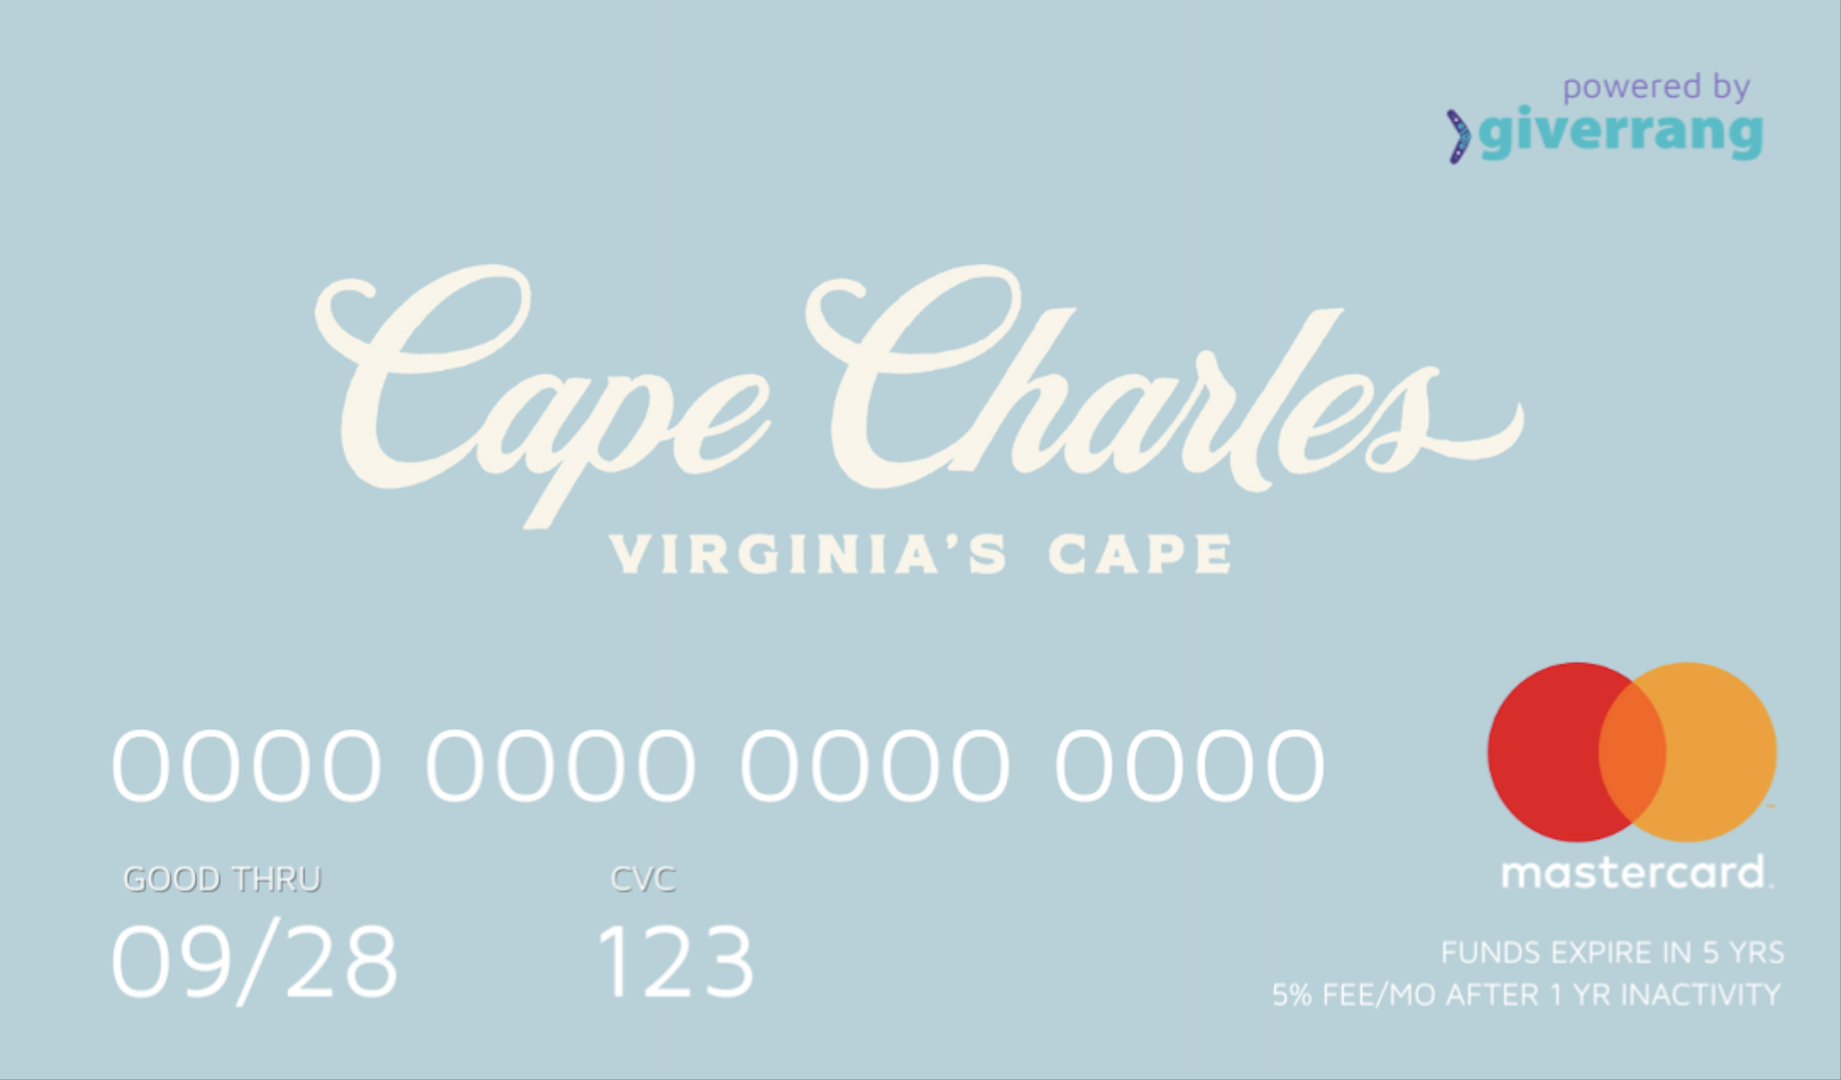 image of the cape charles gift card